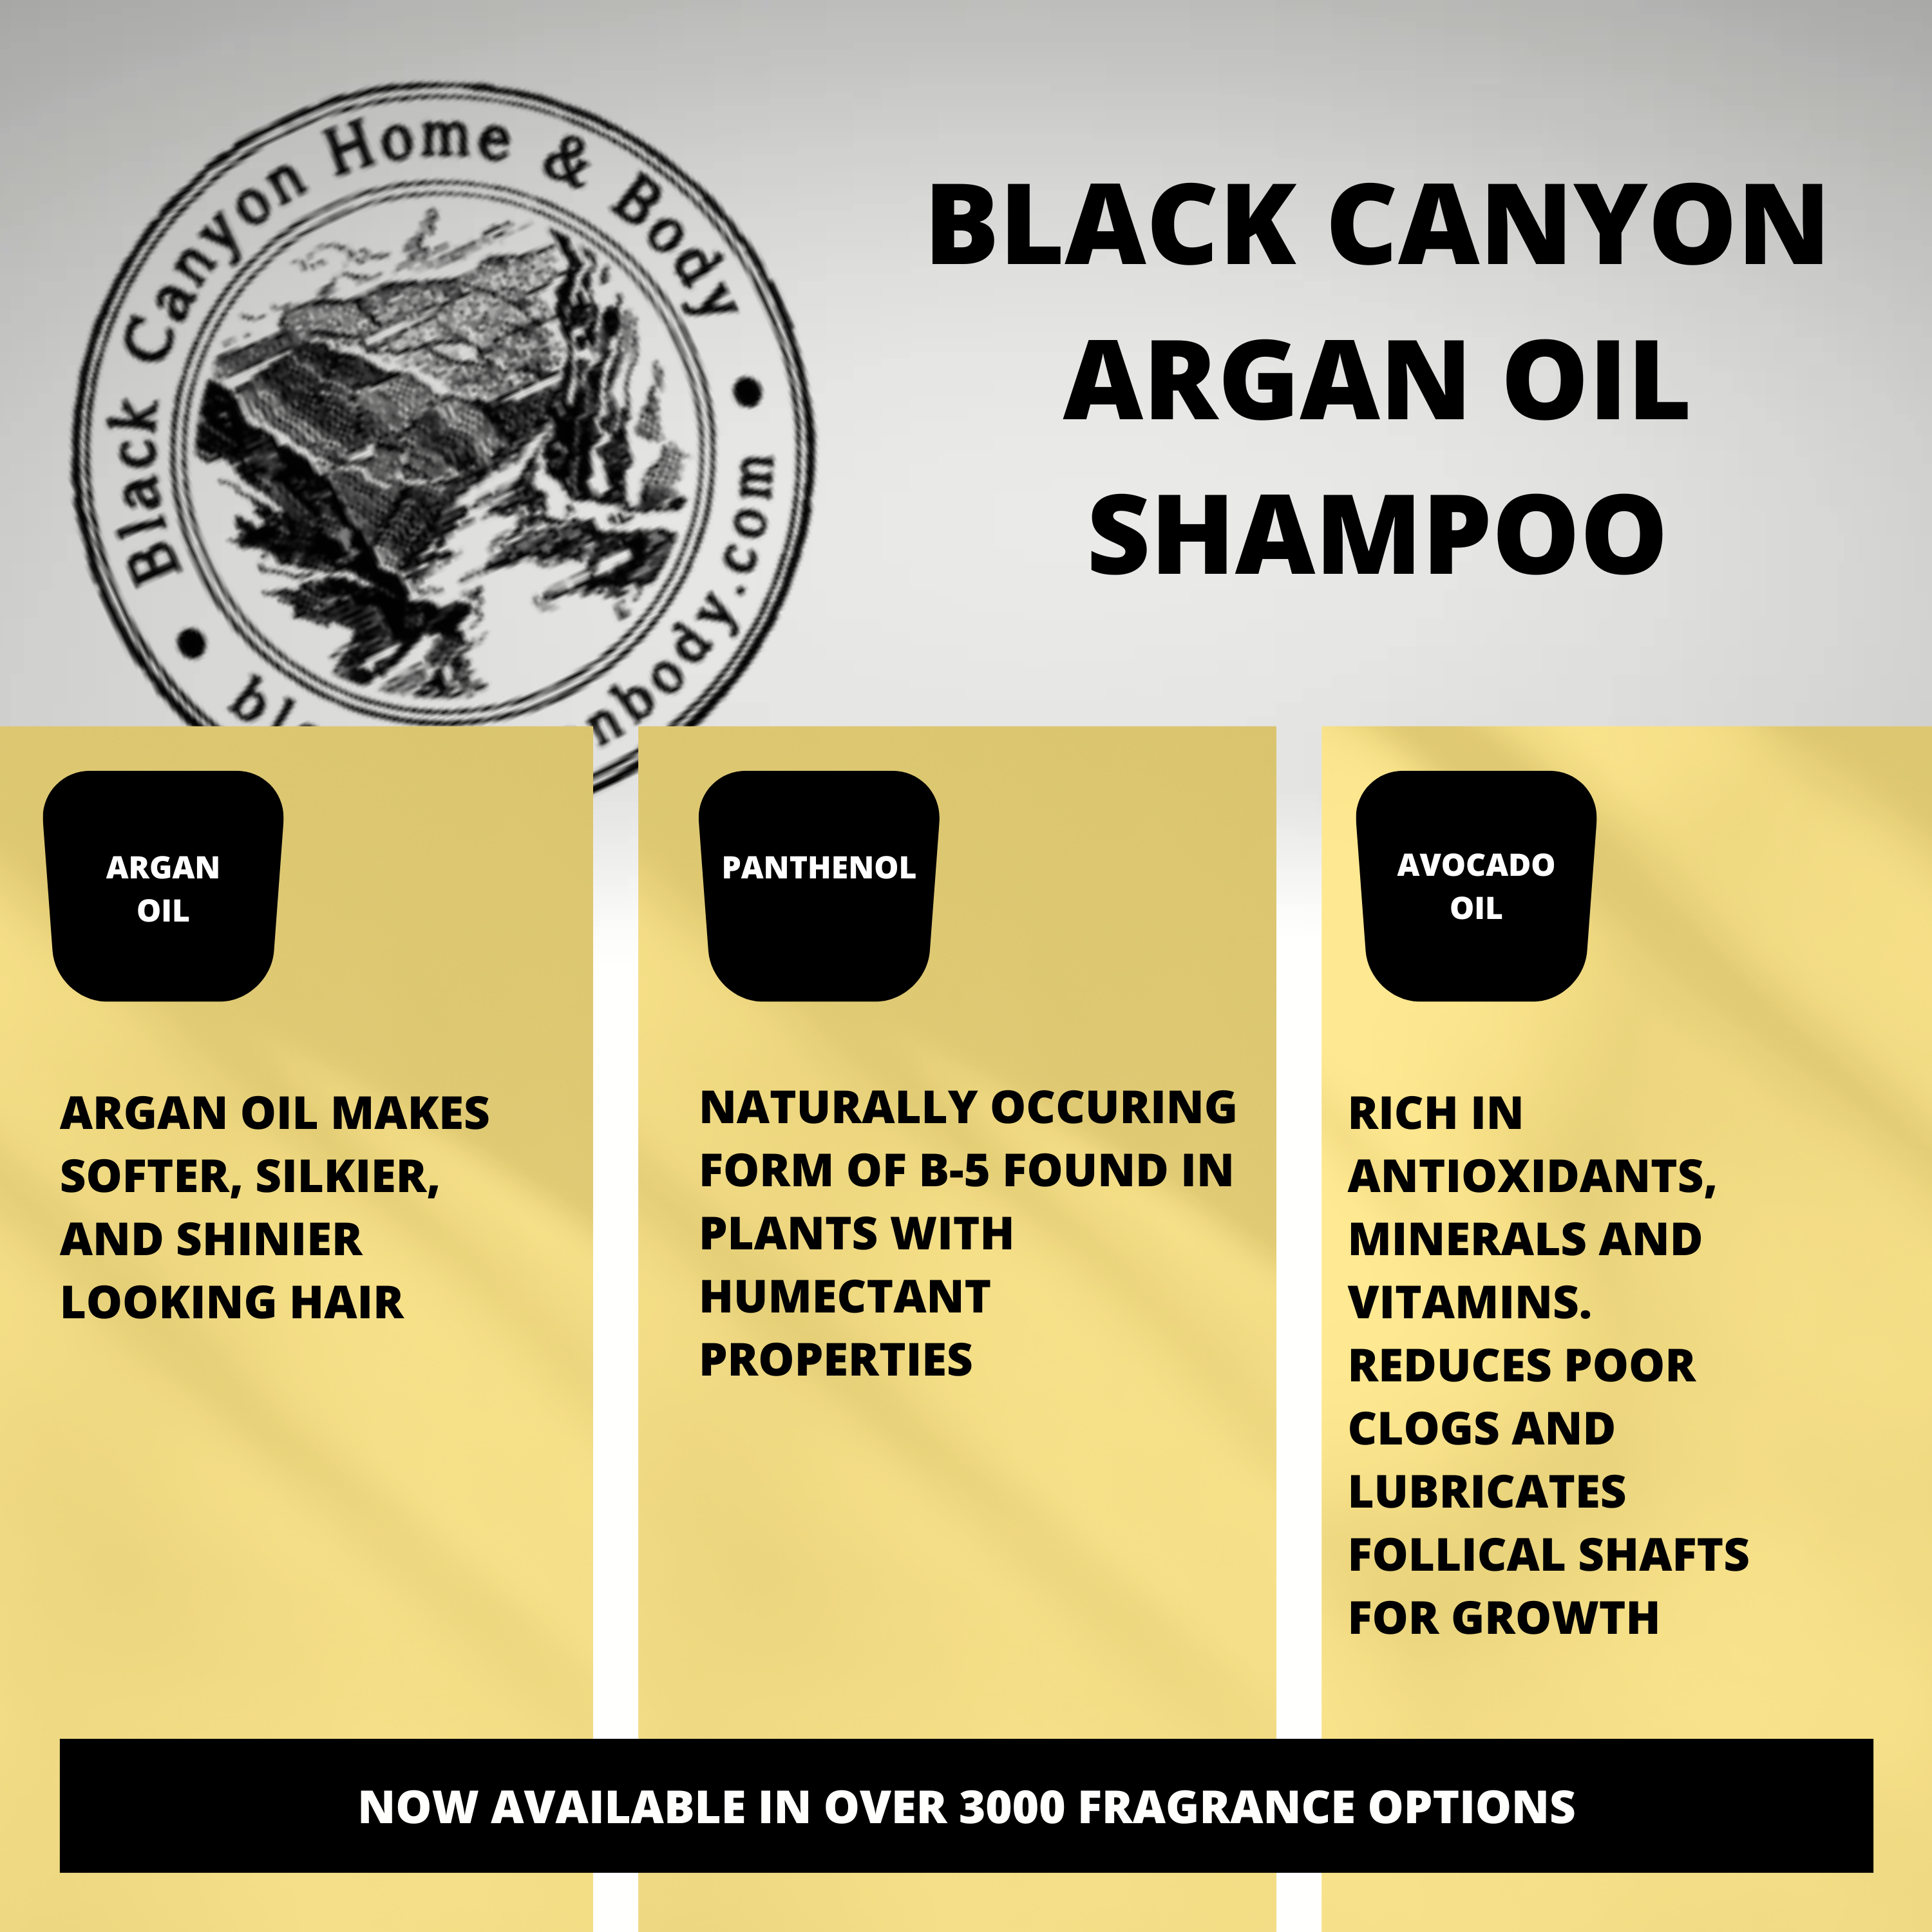 Black Canyon Apples & Acorns Scented Shampoo with Argan Oil